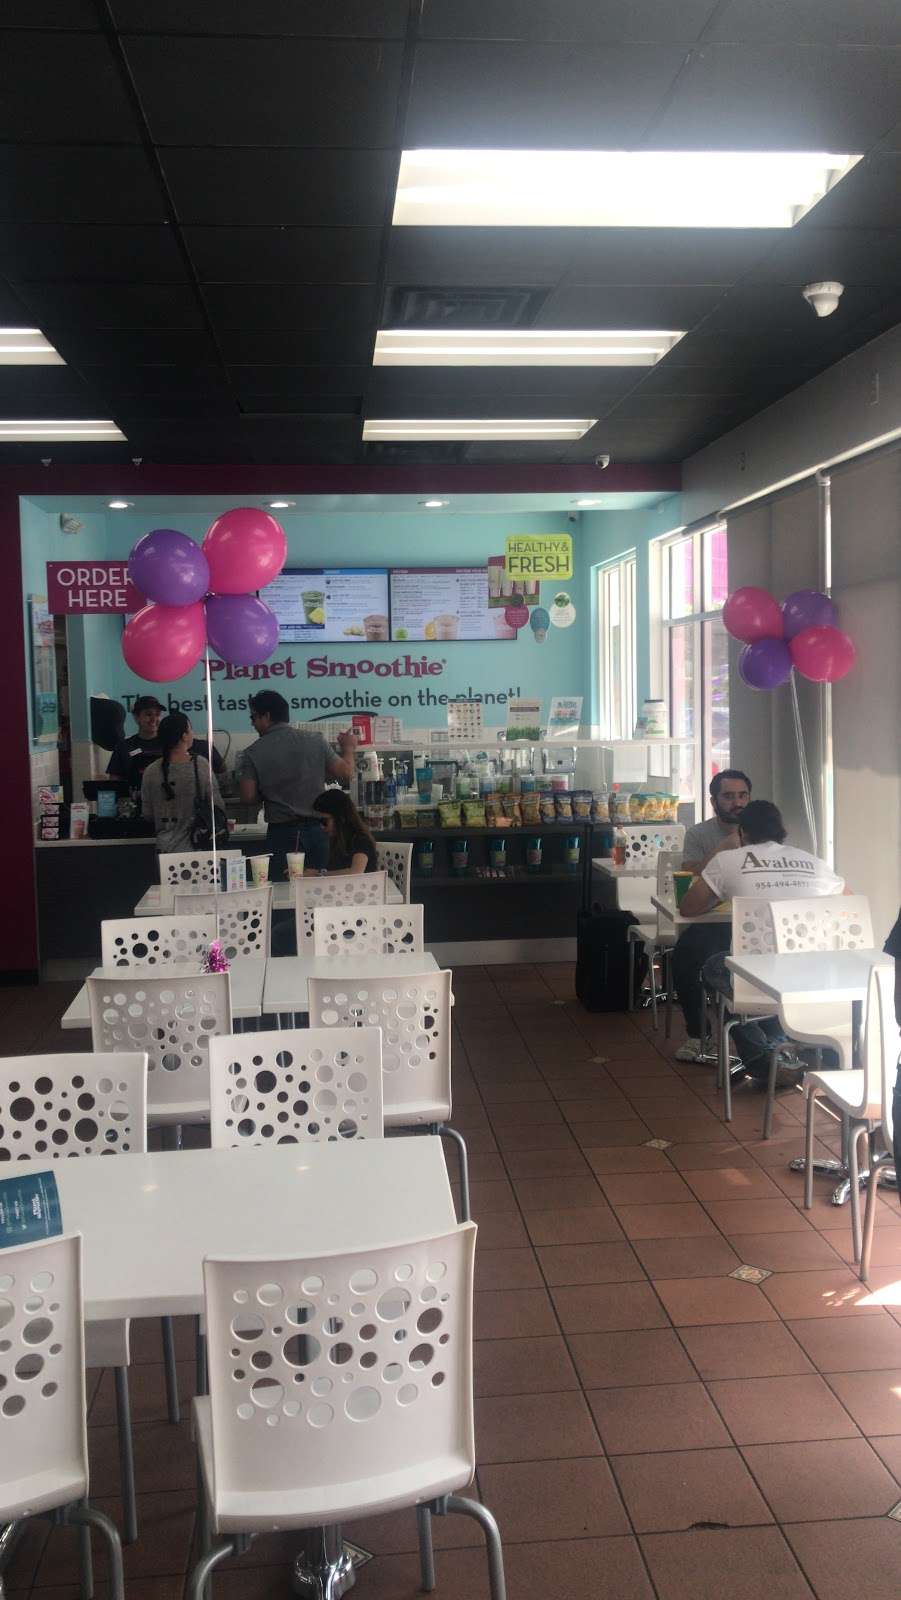 Planet Smoothie 58th Street & 87the Ave | 8695 NW 58th St, Miami, FL 33178, USA | Phone: (305) 599-3695